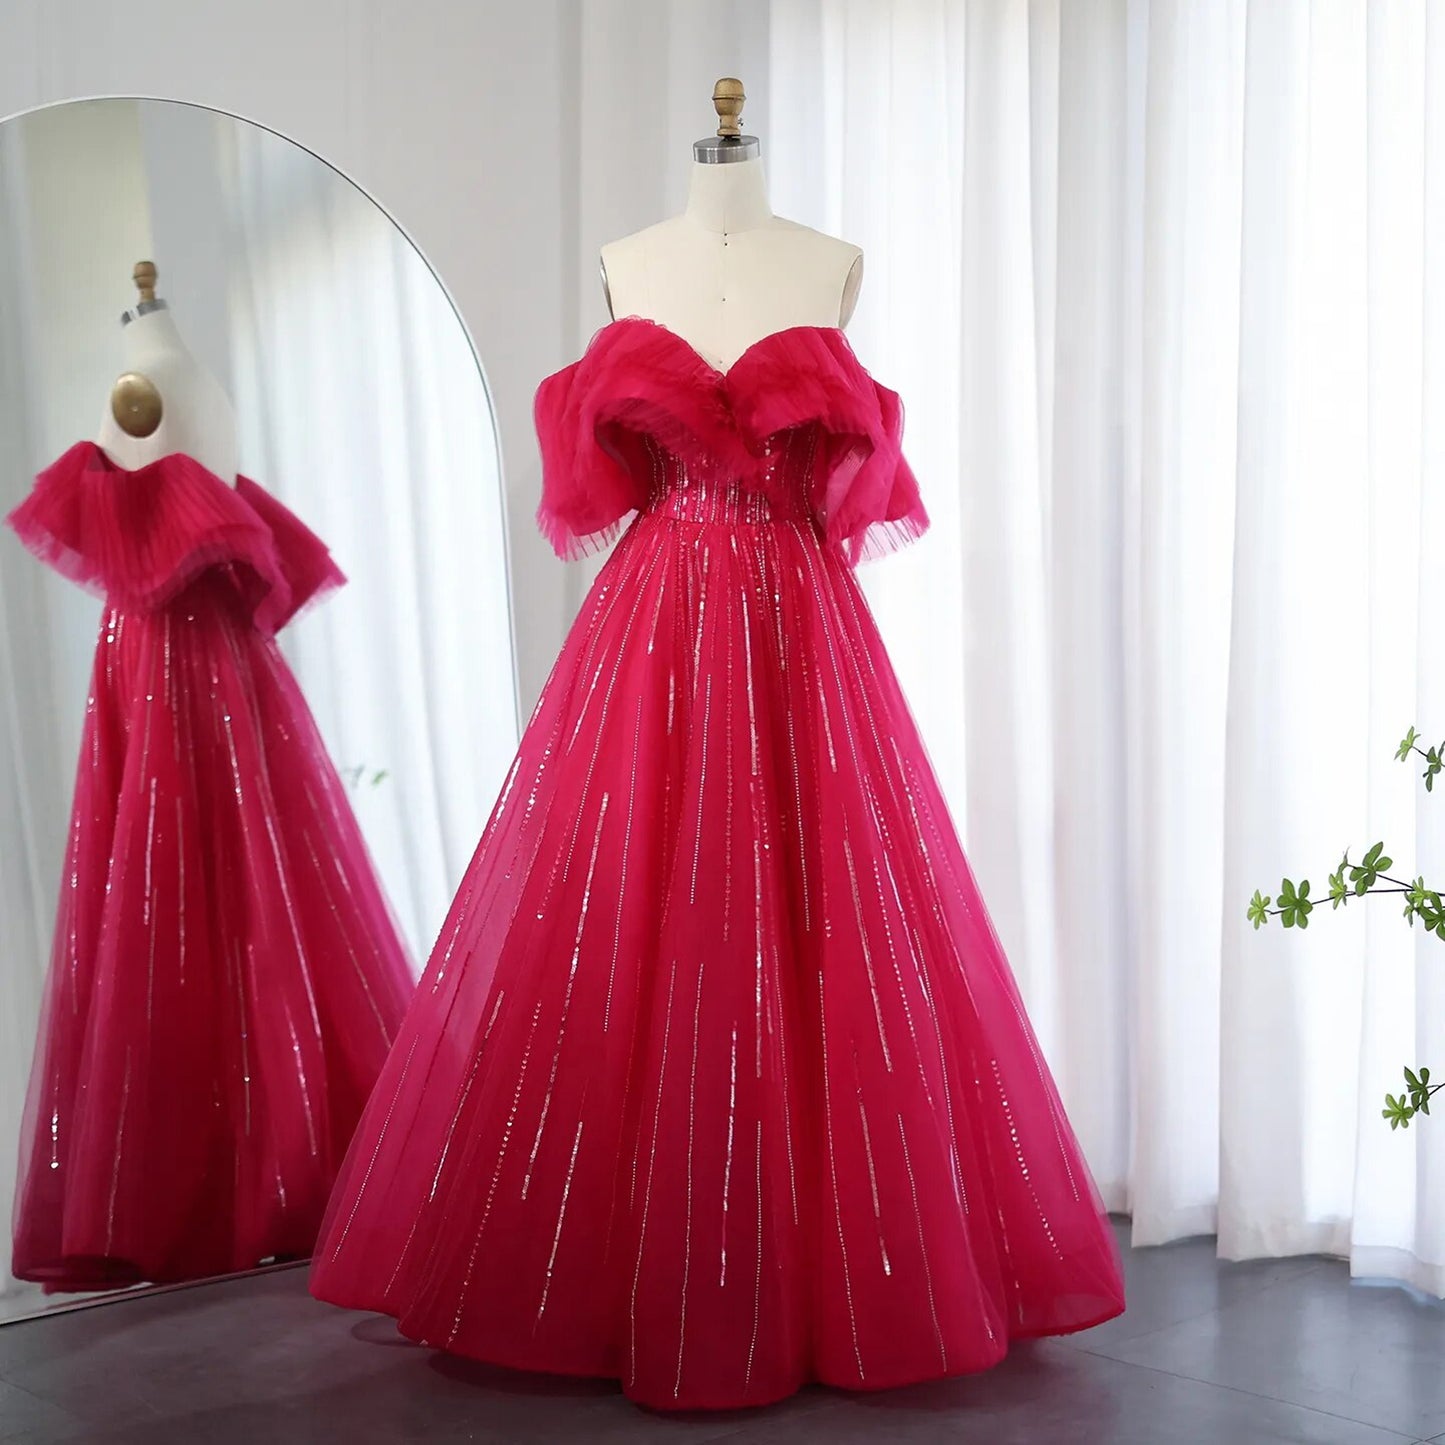 Strapless Sequin Embellished Fuchsia Gown